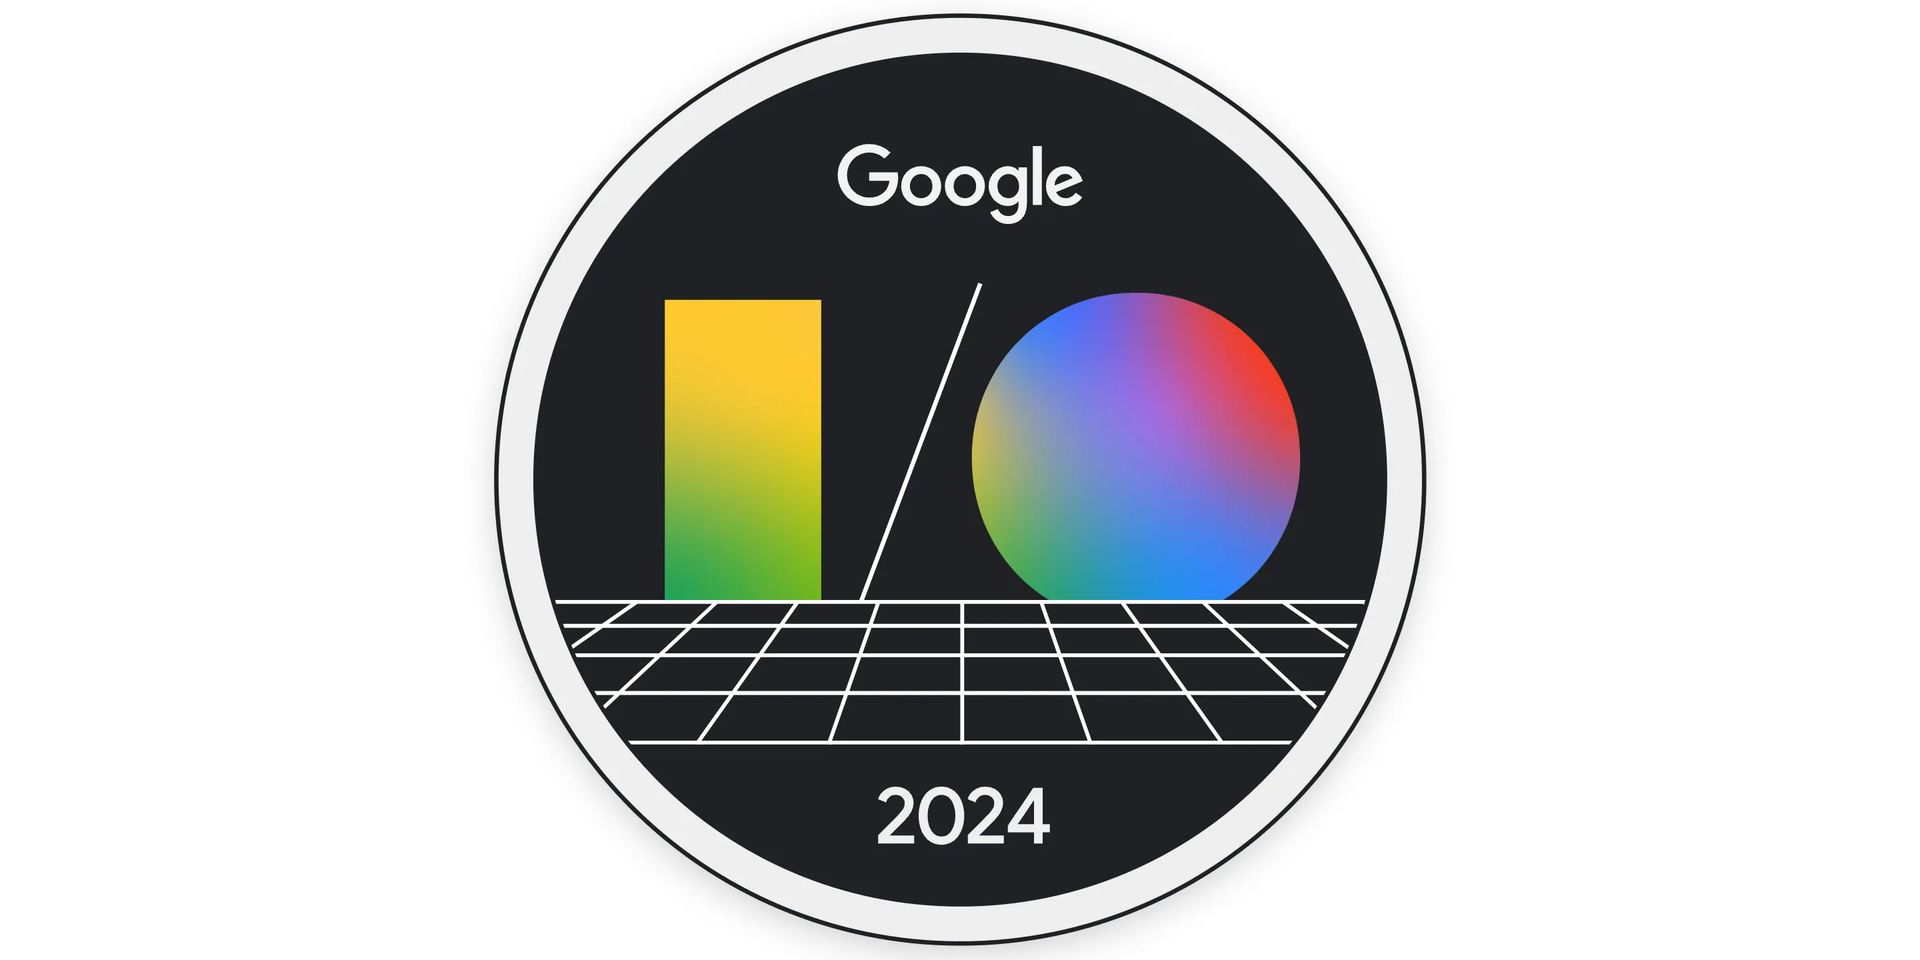 Google I/O 2024: What should we expect?